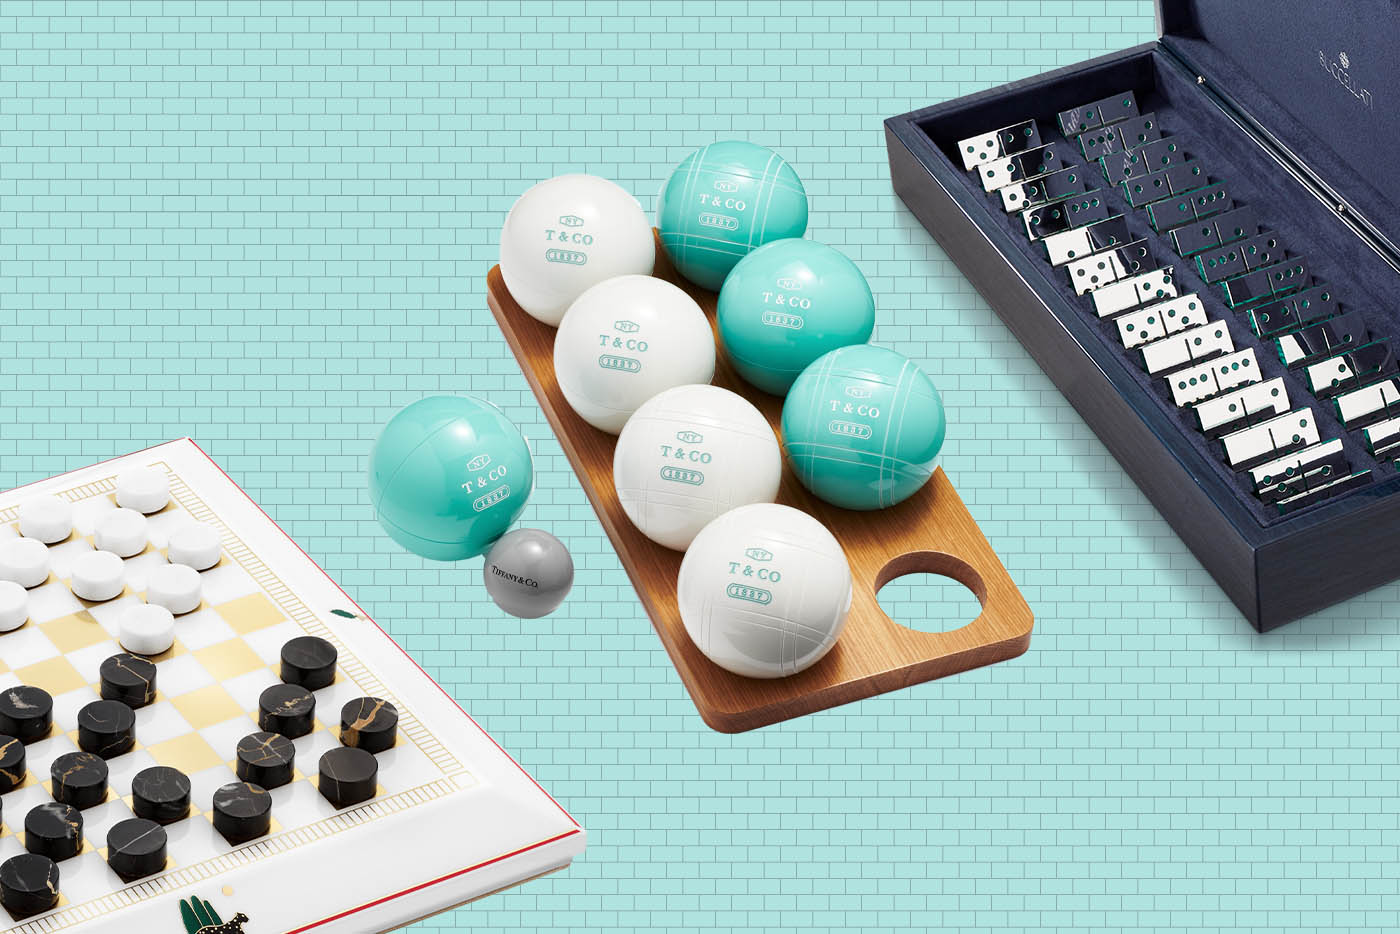 These Luxury Game Sets Will Keep You Entertained In Style